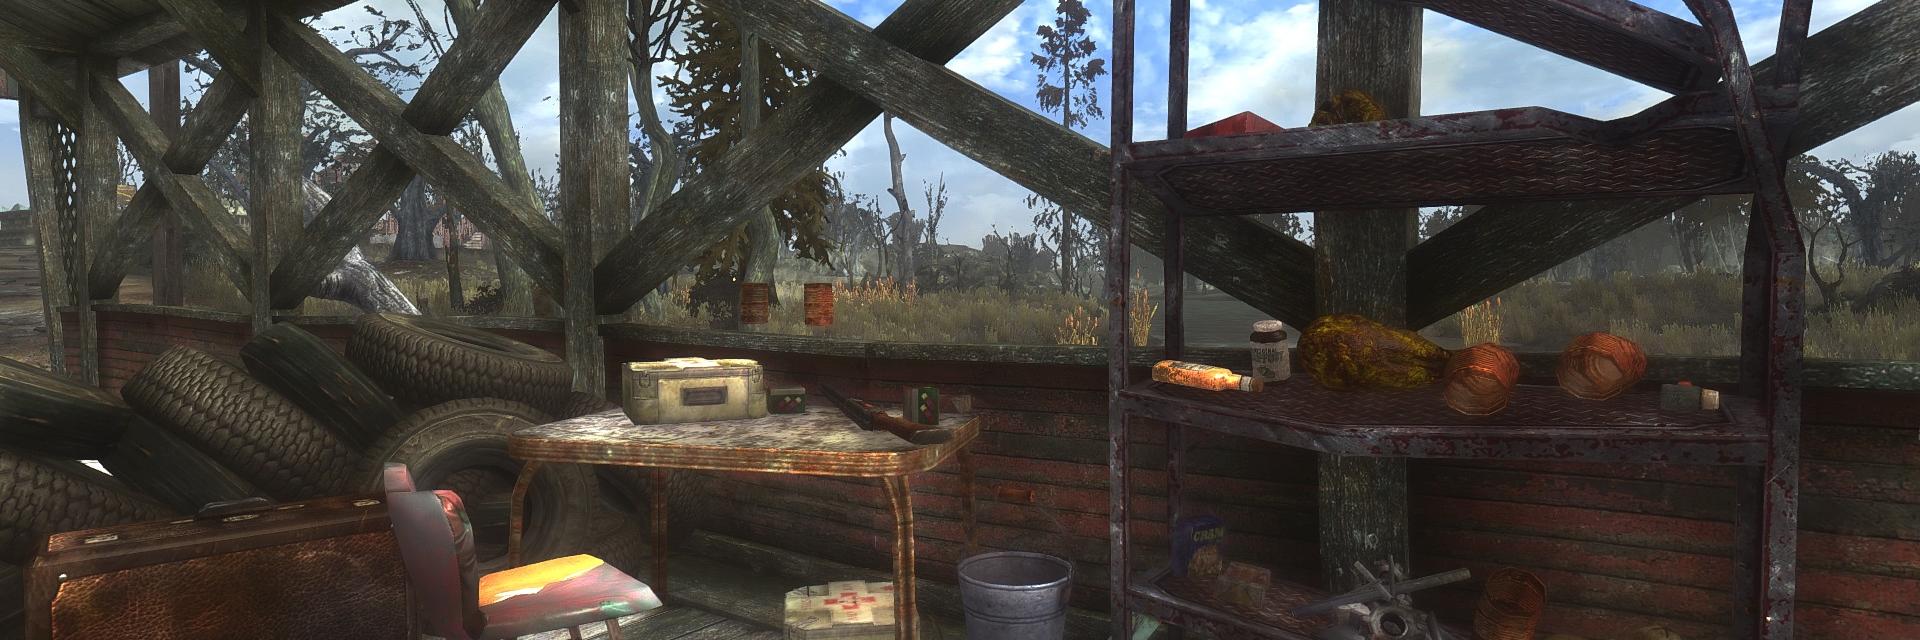 Scene from Fallout